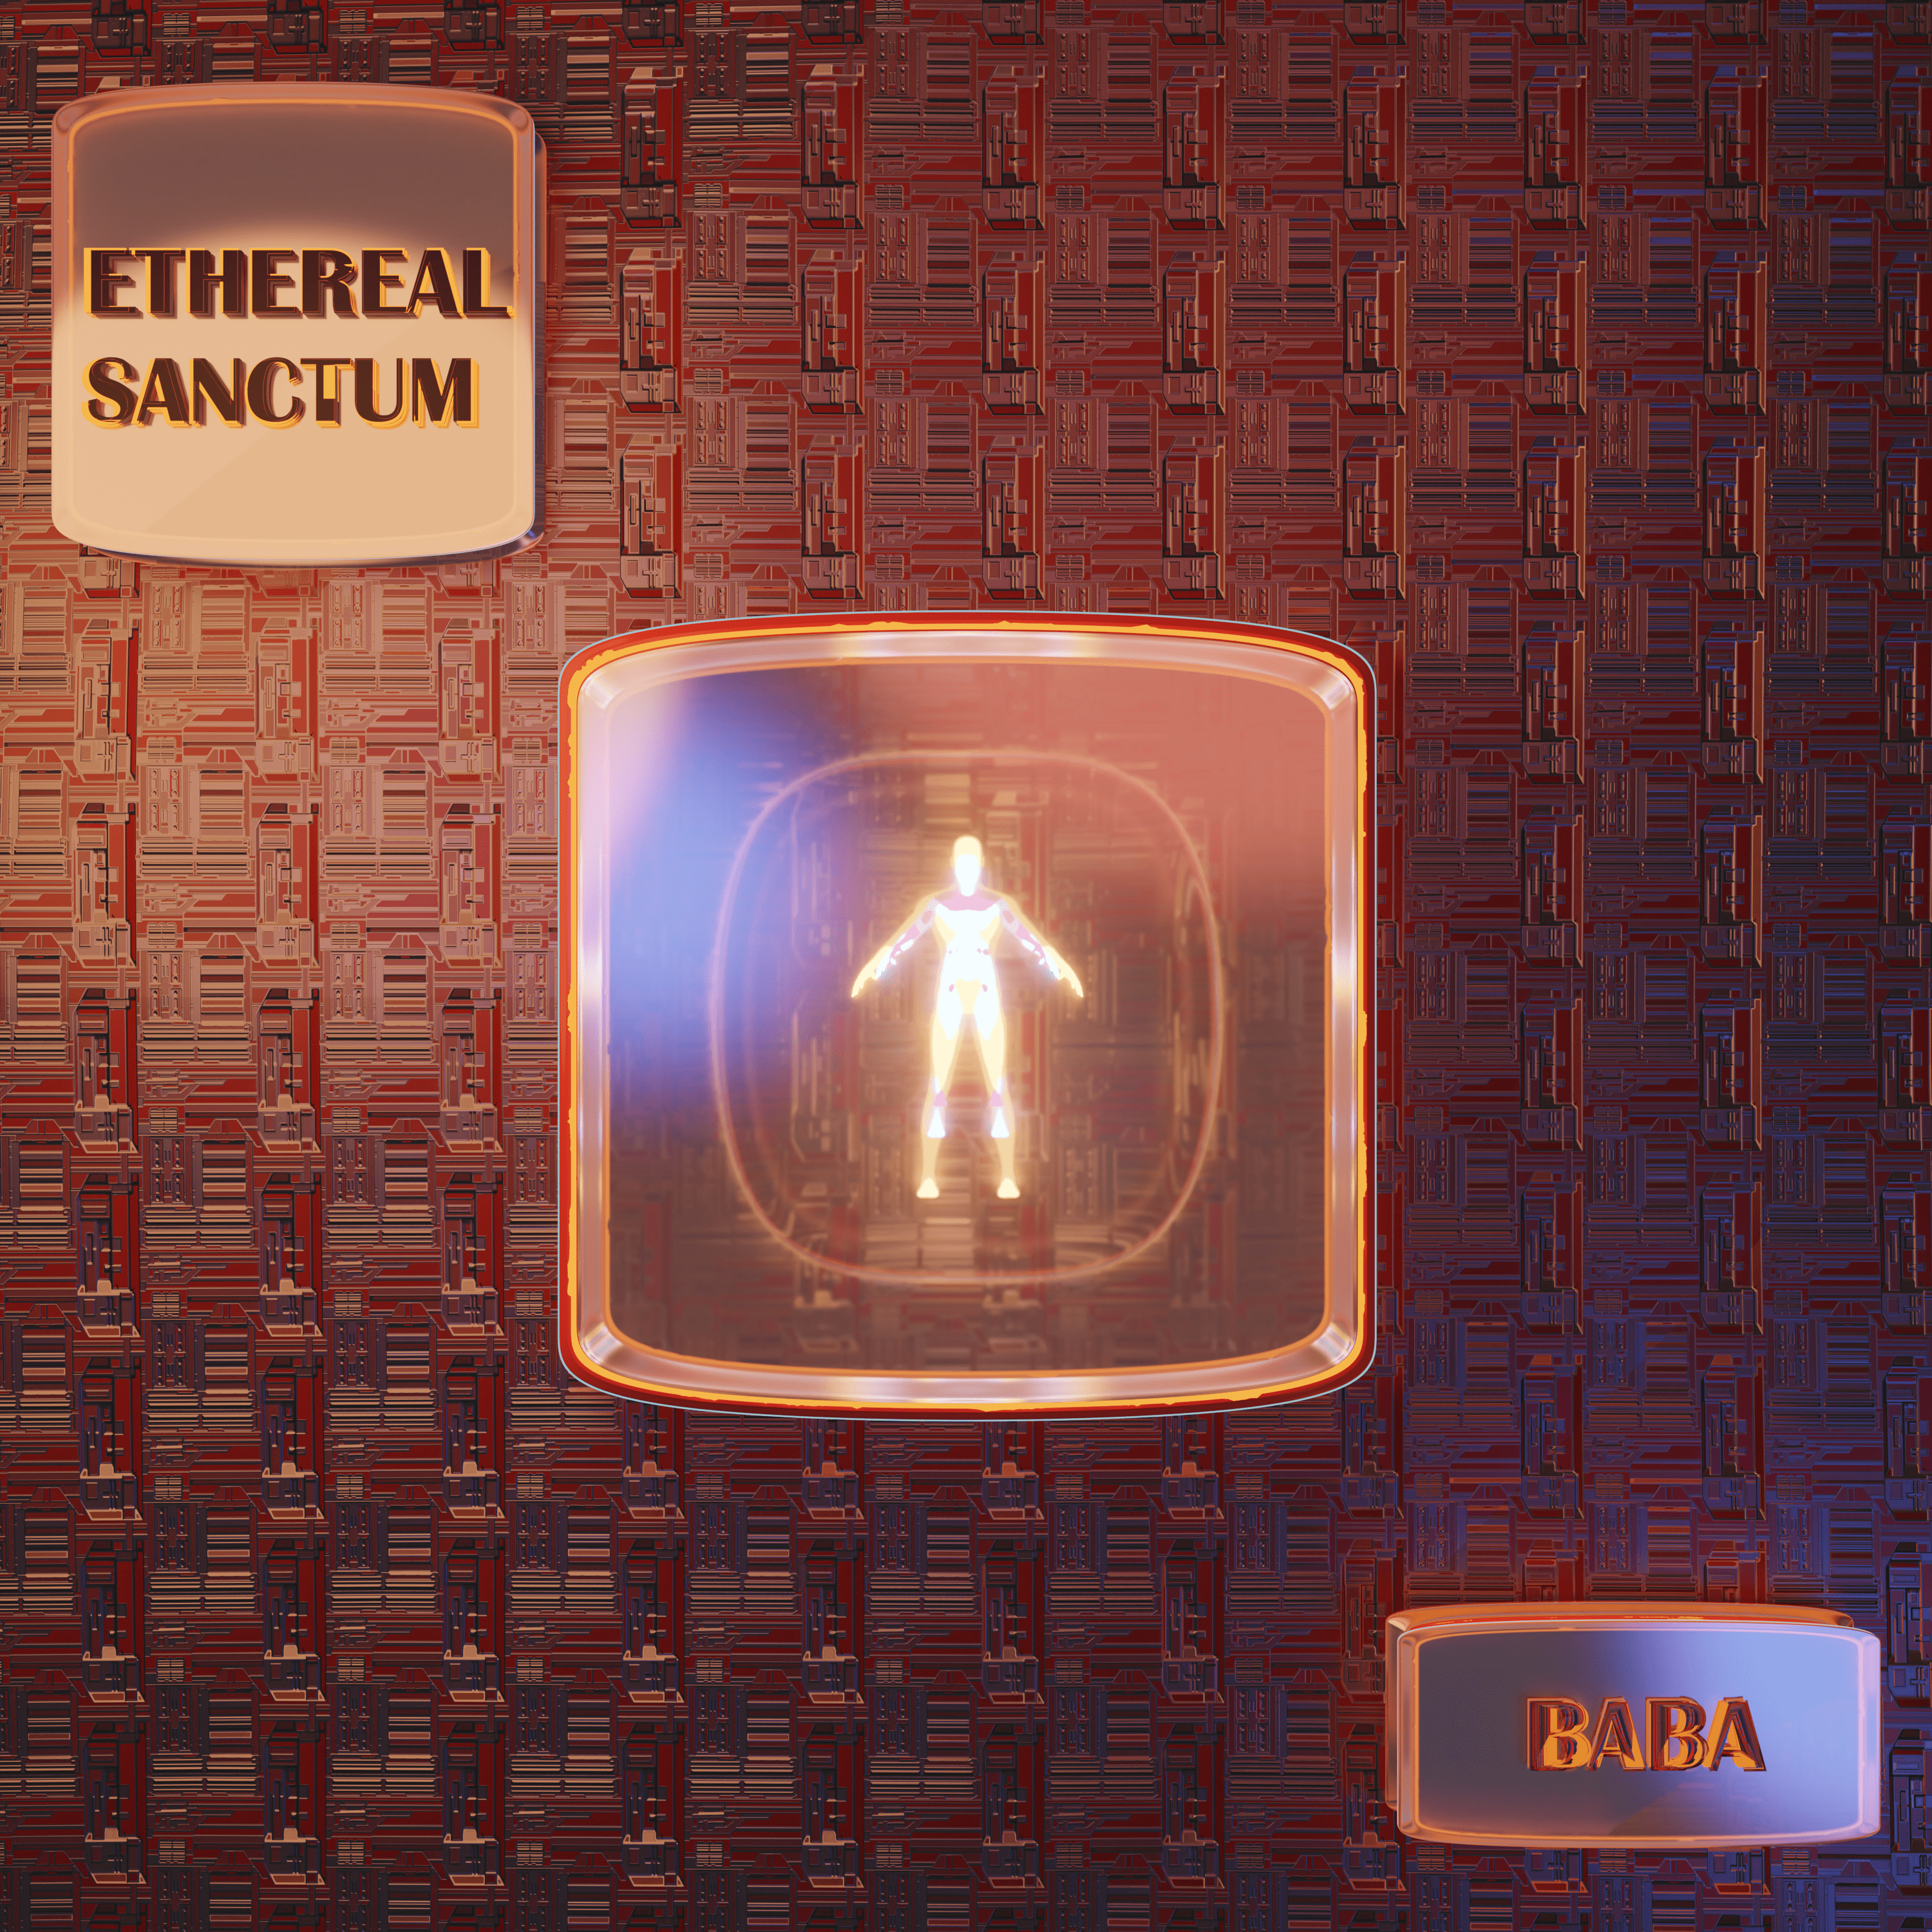 Cover art for Baba's song: Ethereal Sanctum